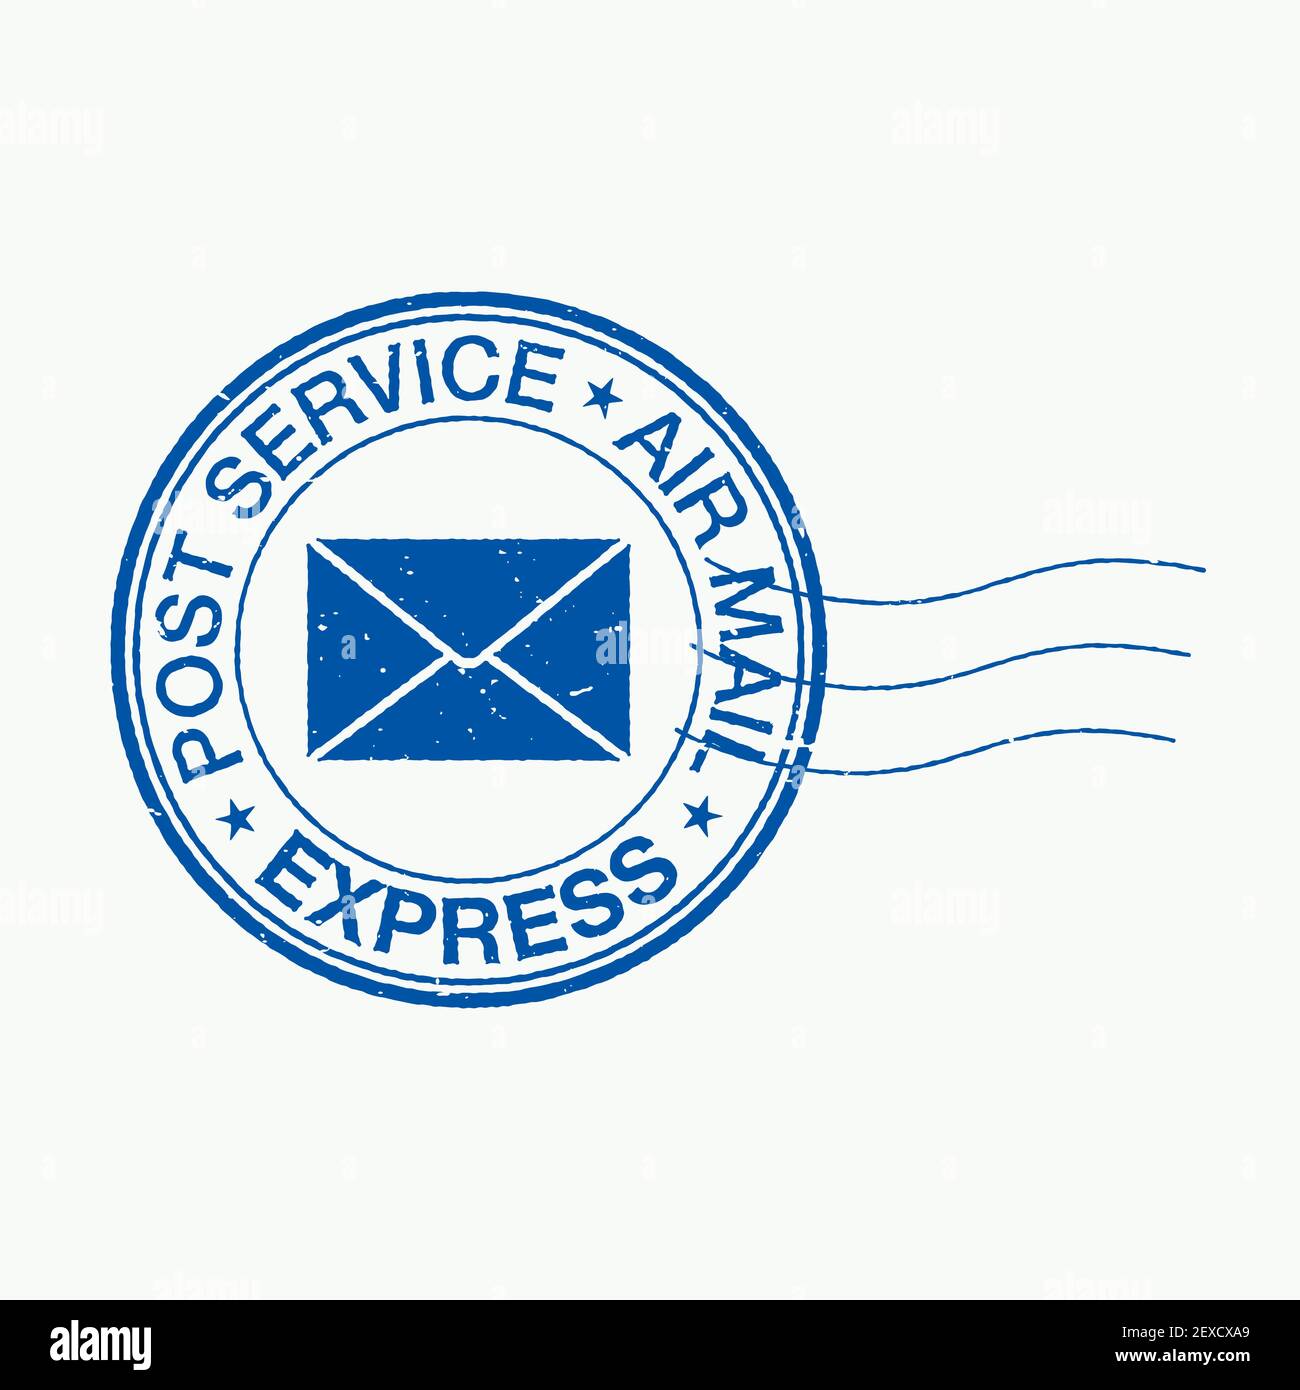 Distressed postal stamp vector illustration. Round shape blue postage stamp, with Post Service, Air Mail, and Express text. Stock Vector